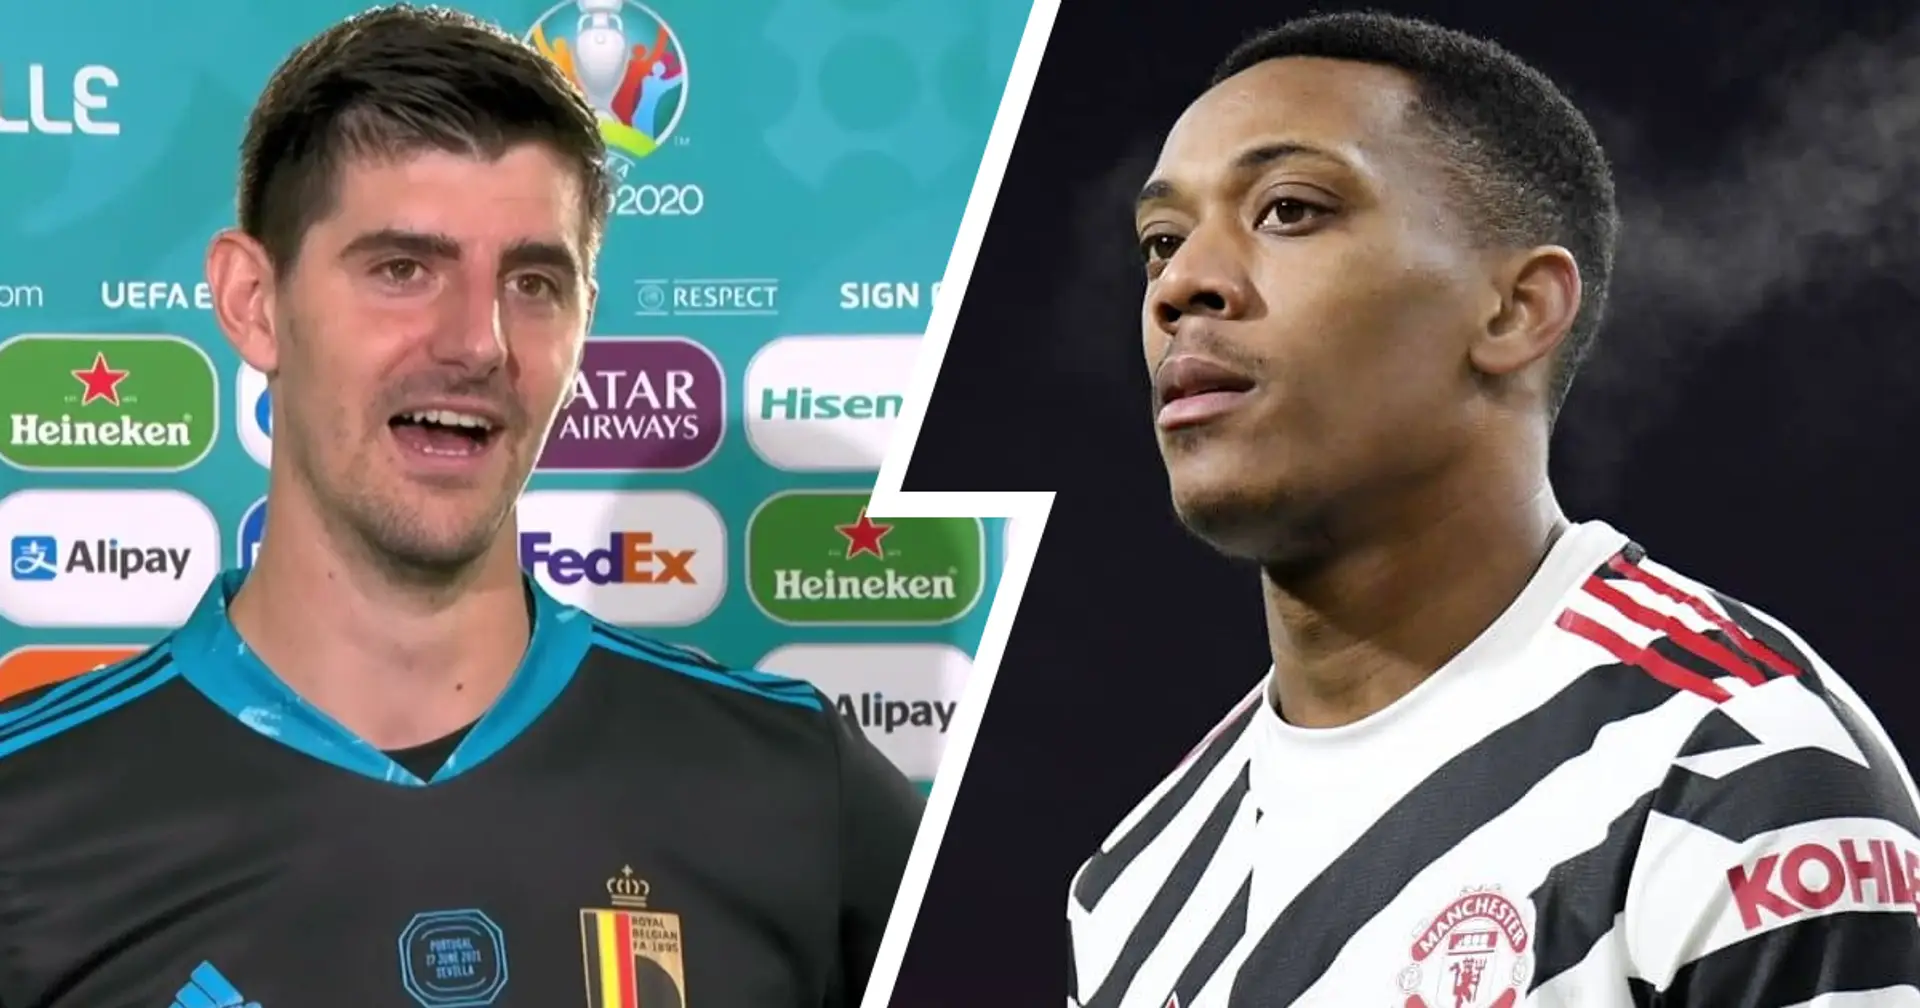 'He’s not a major player': Thibaut Courtois brutally trolls Anthony Martial during Euro 2020 interview